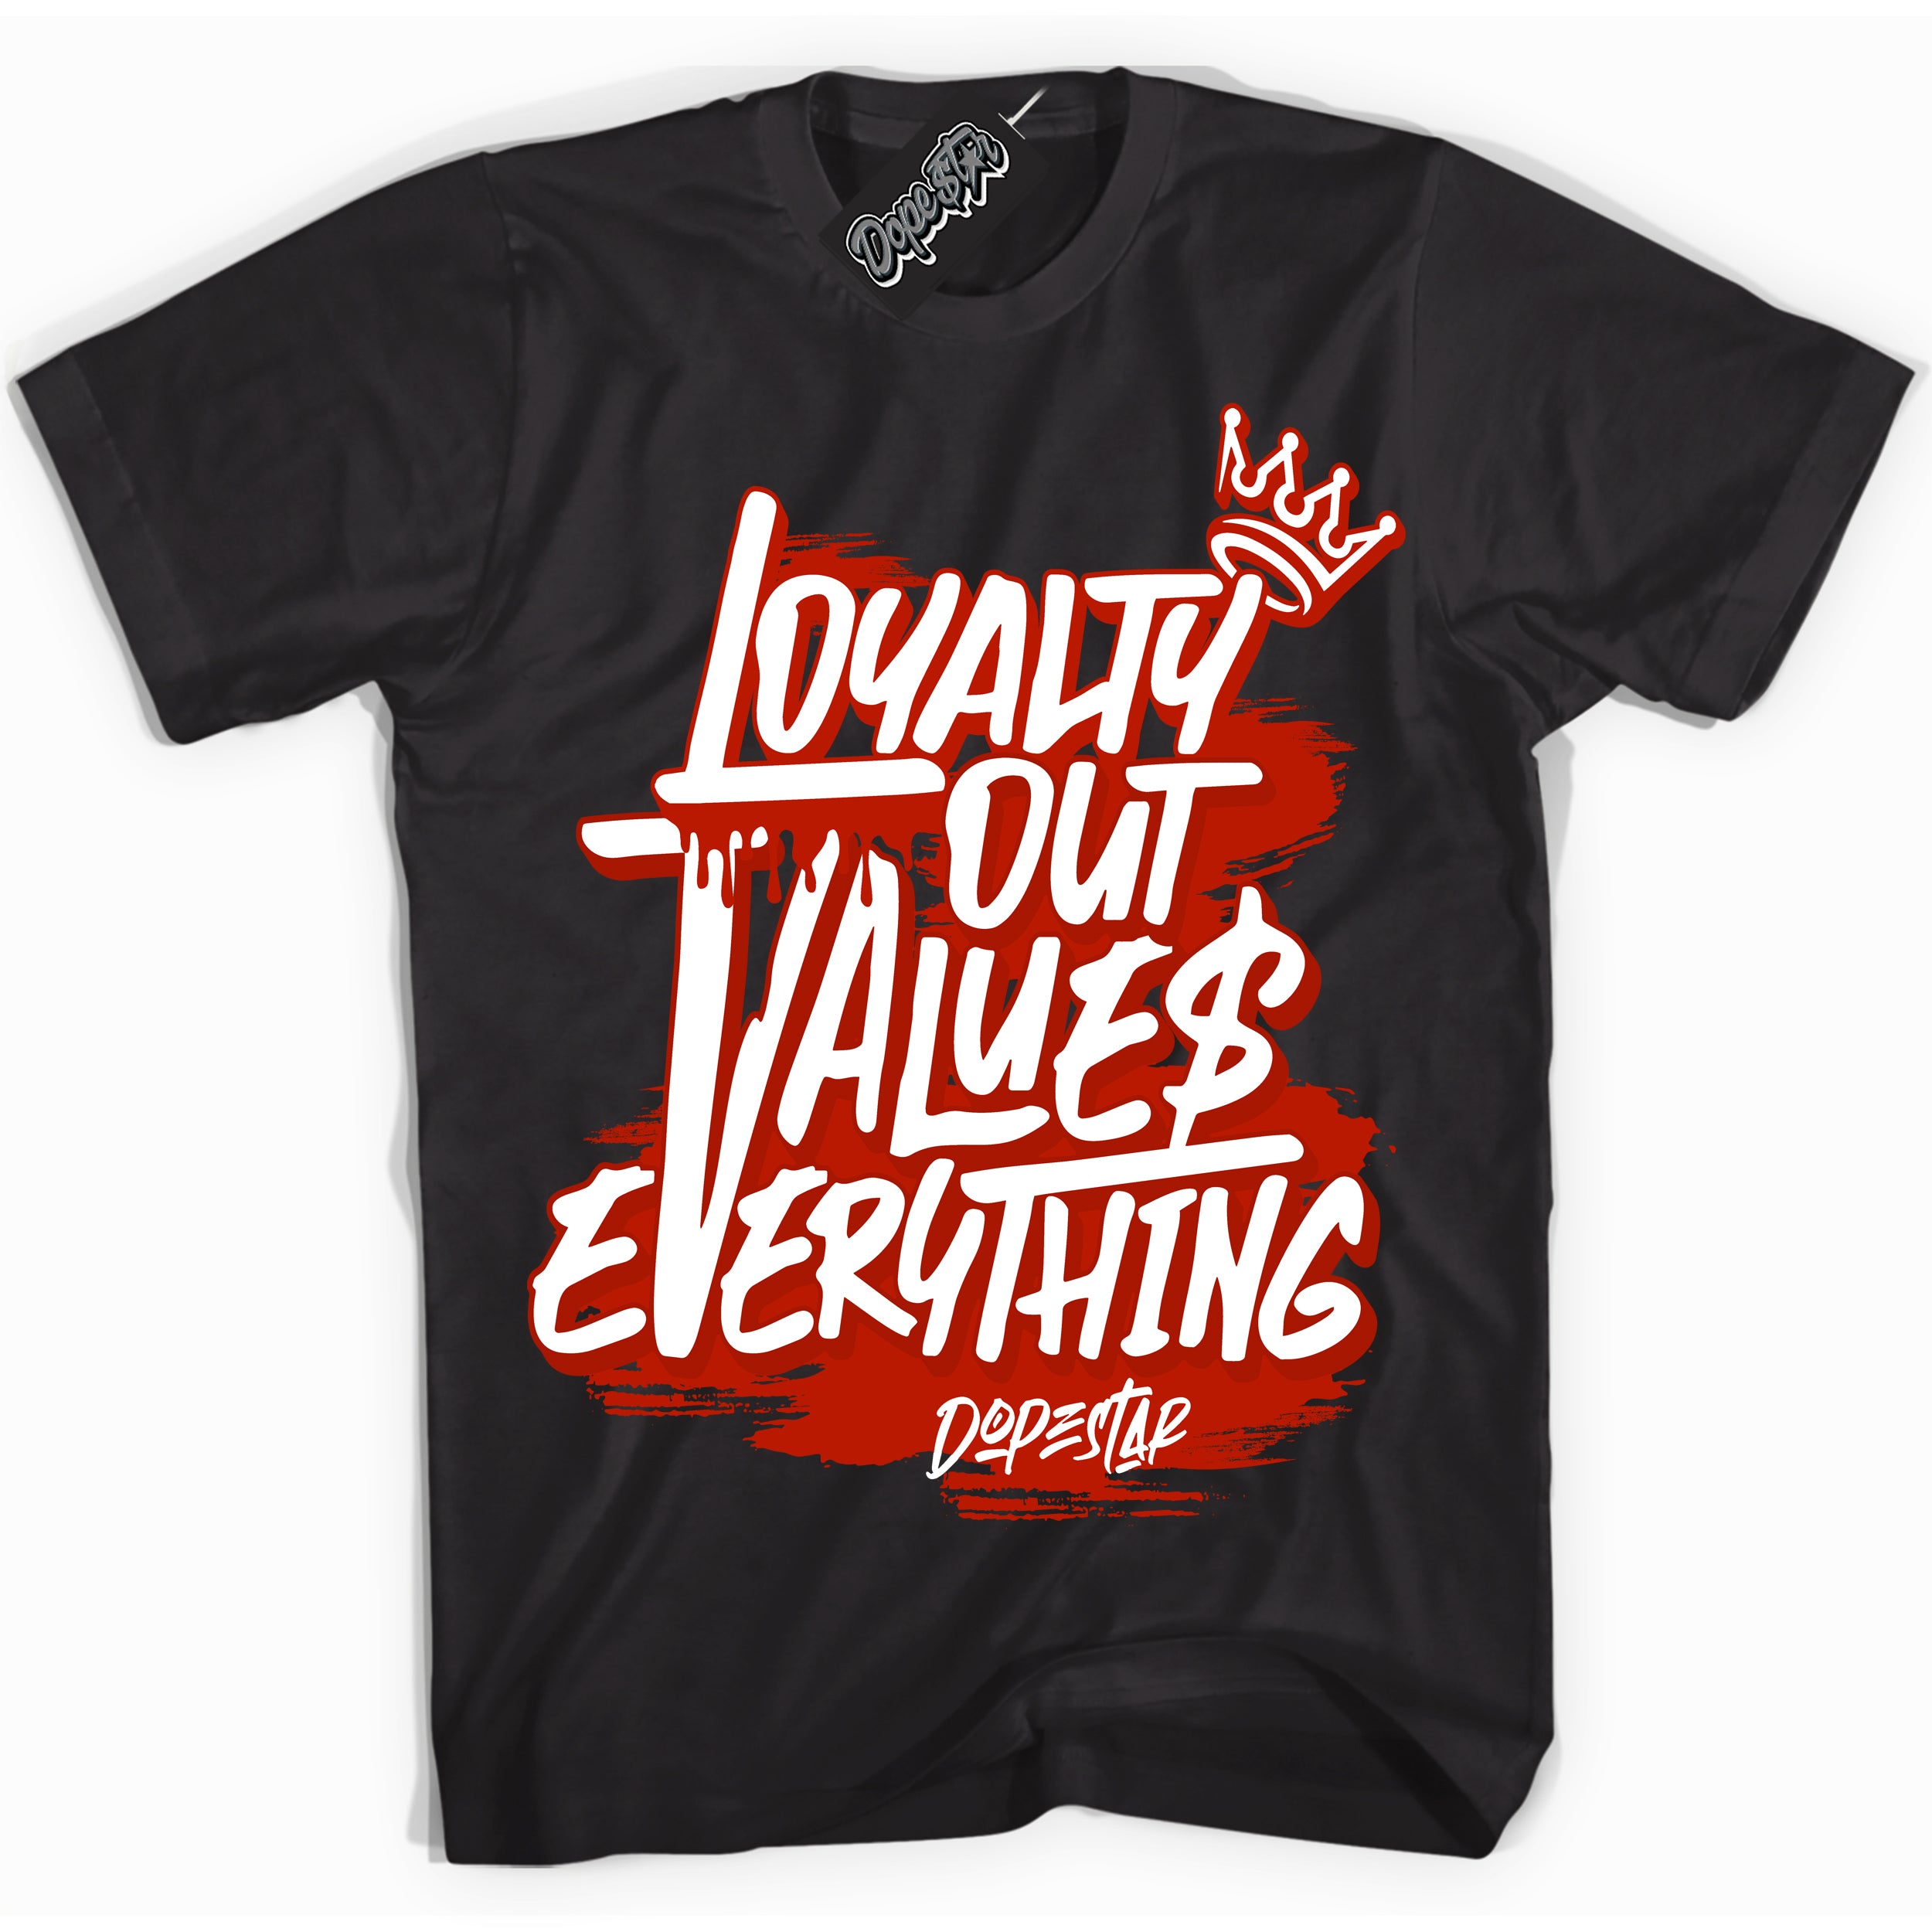 Cool Black Shirt with “ Loyalty Out Values Everything” design that perfectly matches Cherry 11s Sneakers.